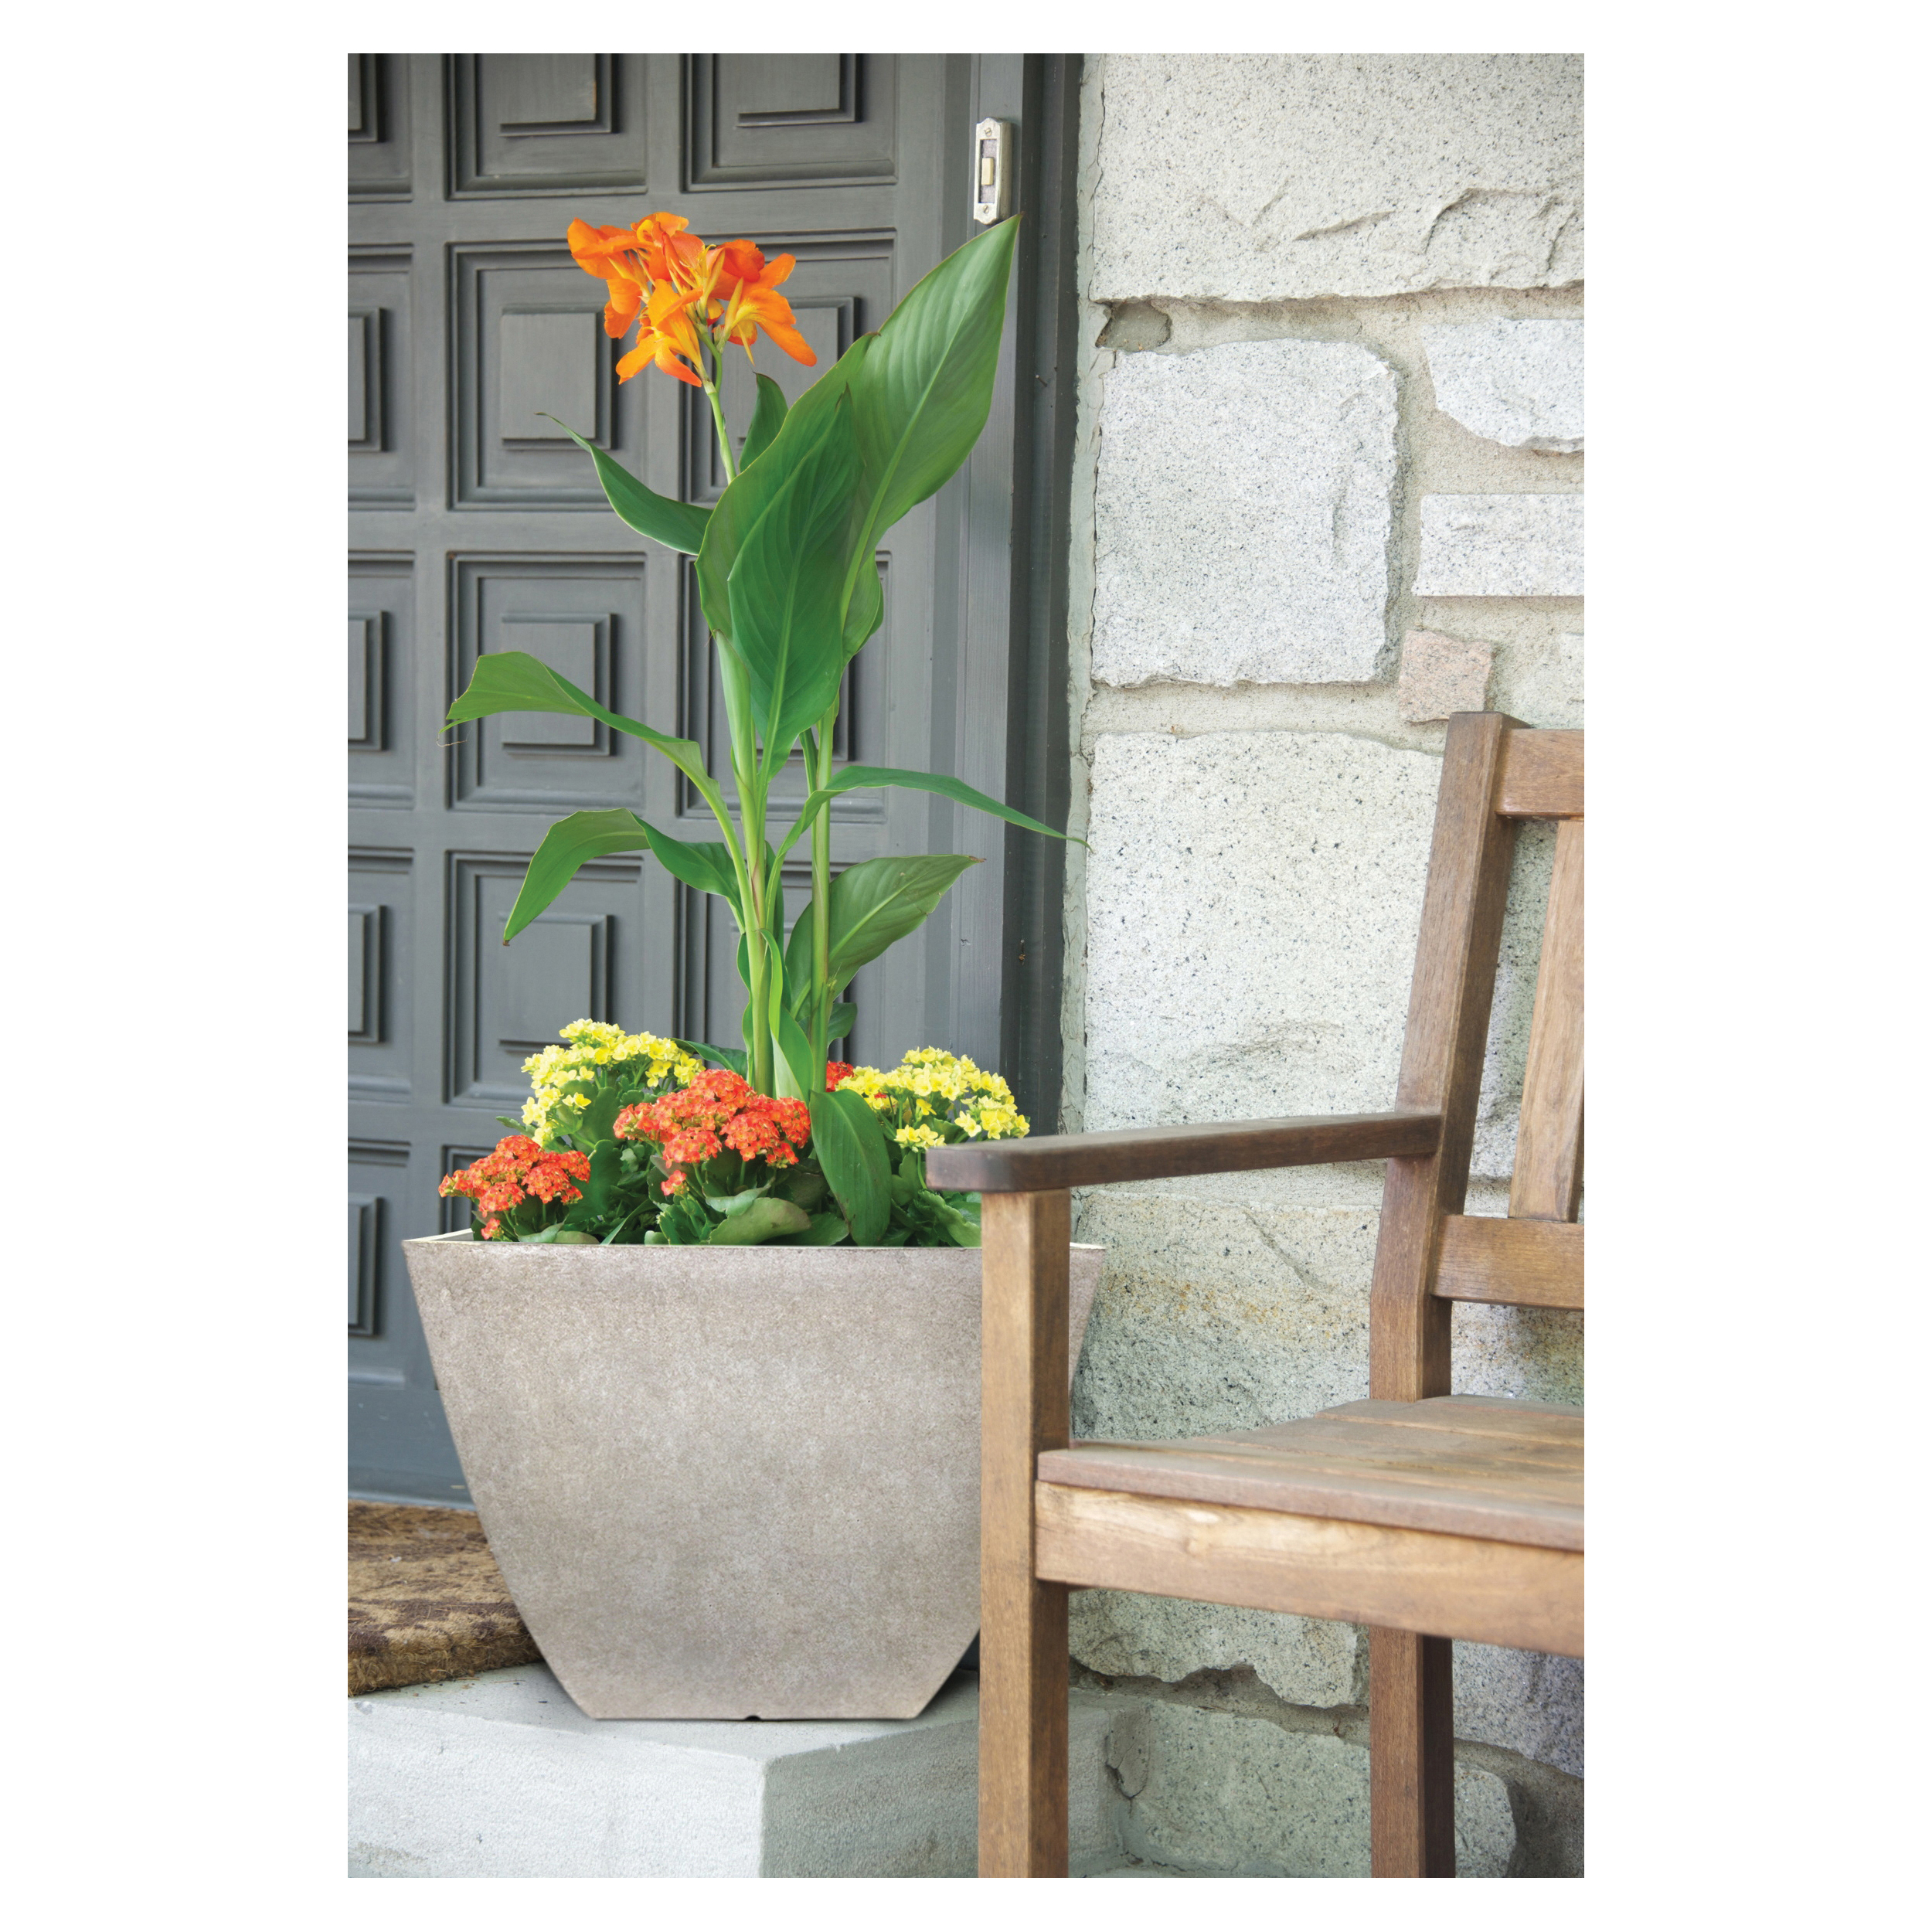 HDR-091677 Newland Planter, 13-1/2 in H, 16 in W, 16 in D, Square, Plastic/Resin, Gray, Stone Aesthetic